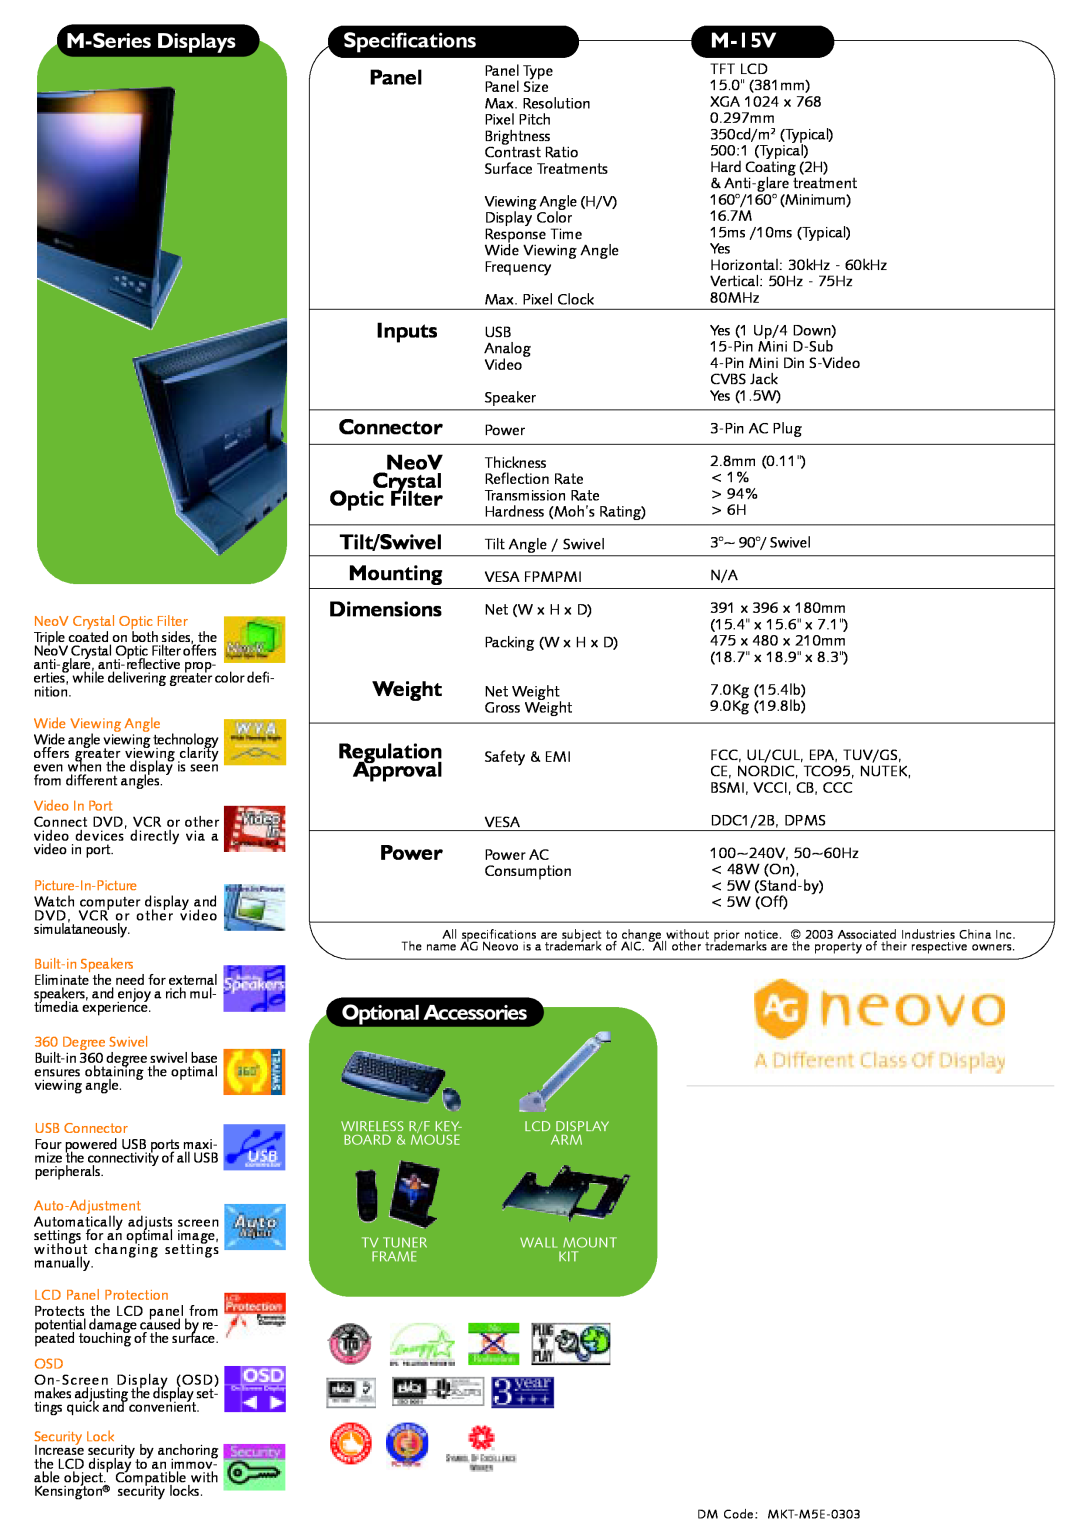 AG Neovo M-15V manual M-Series Displays, Specifications, Panel, Optional Accessories 